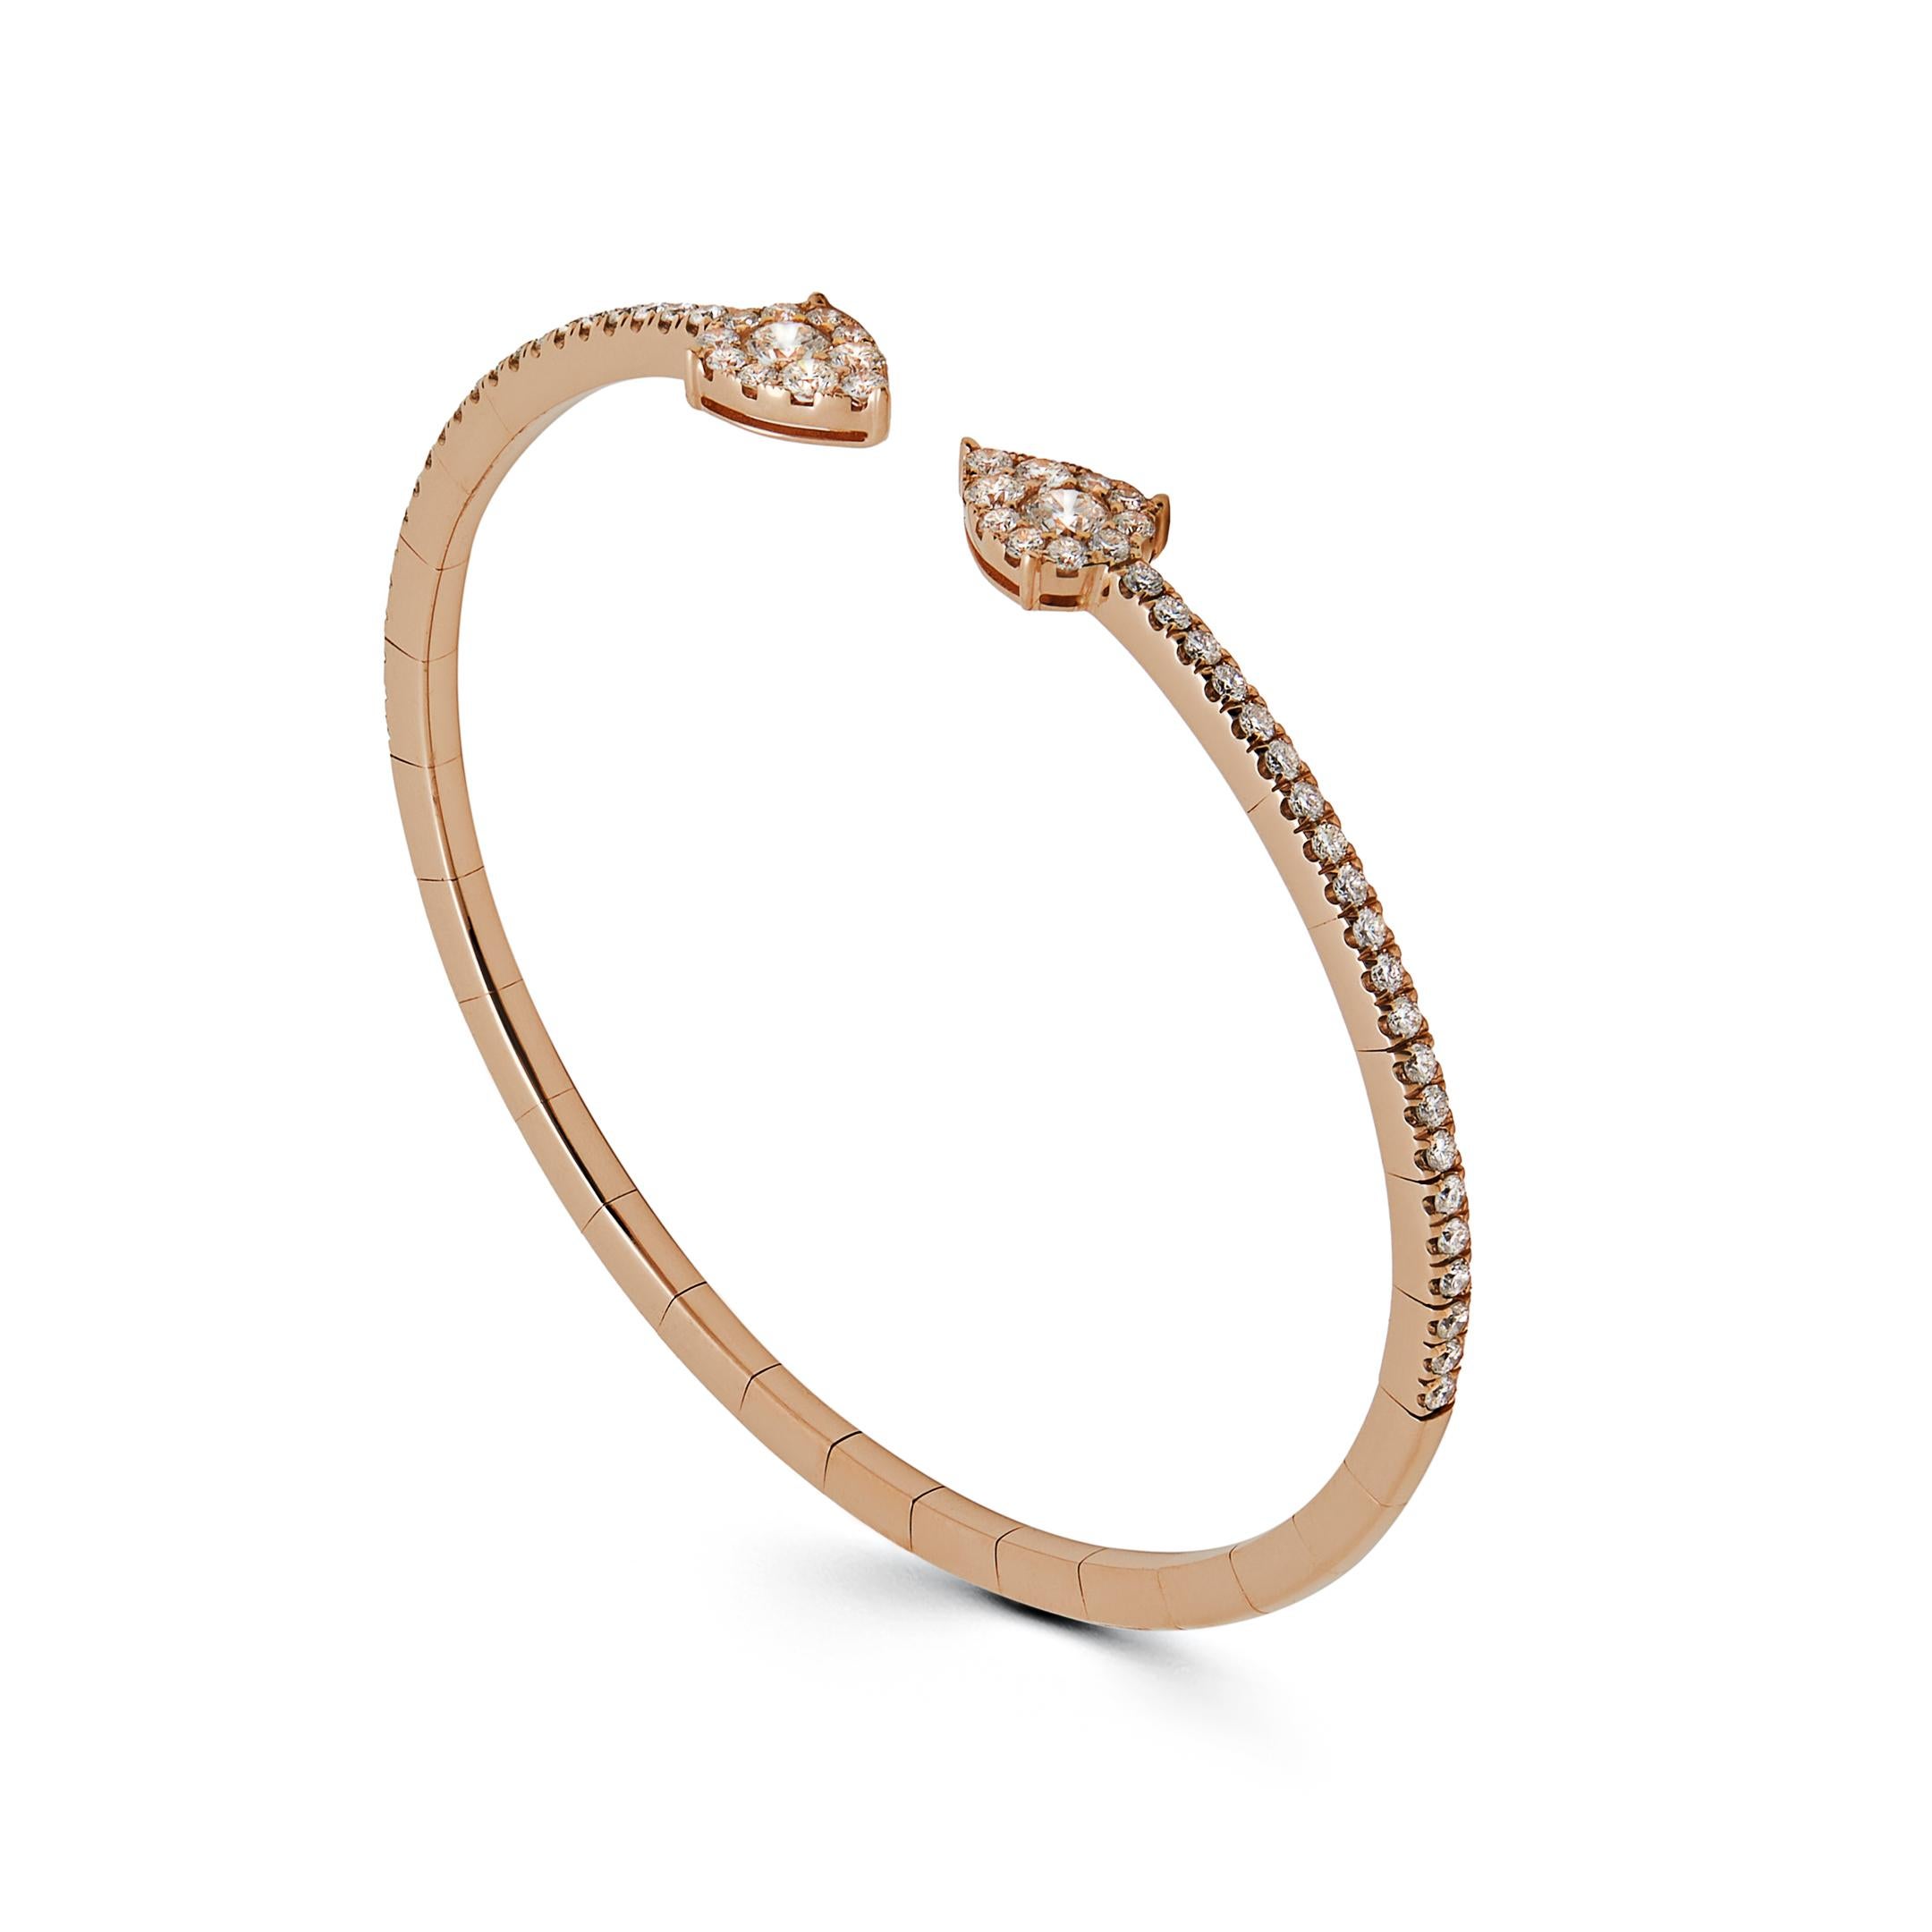 The epitome of effortless glamour, the White Diamond Flexible Cuff Bracelet is the ideal layering piece. Thanks to its stretchy technology, the 18-karat rose gold and white diamond jewel can be comfortably slipped on and off. Pair several of these